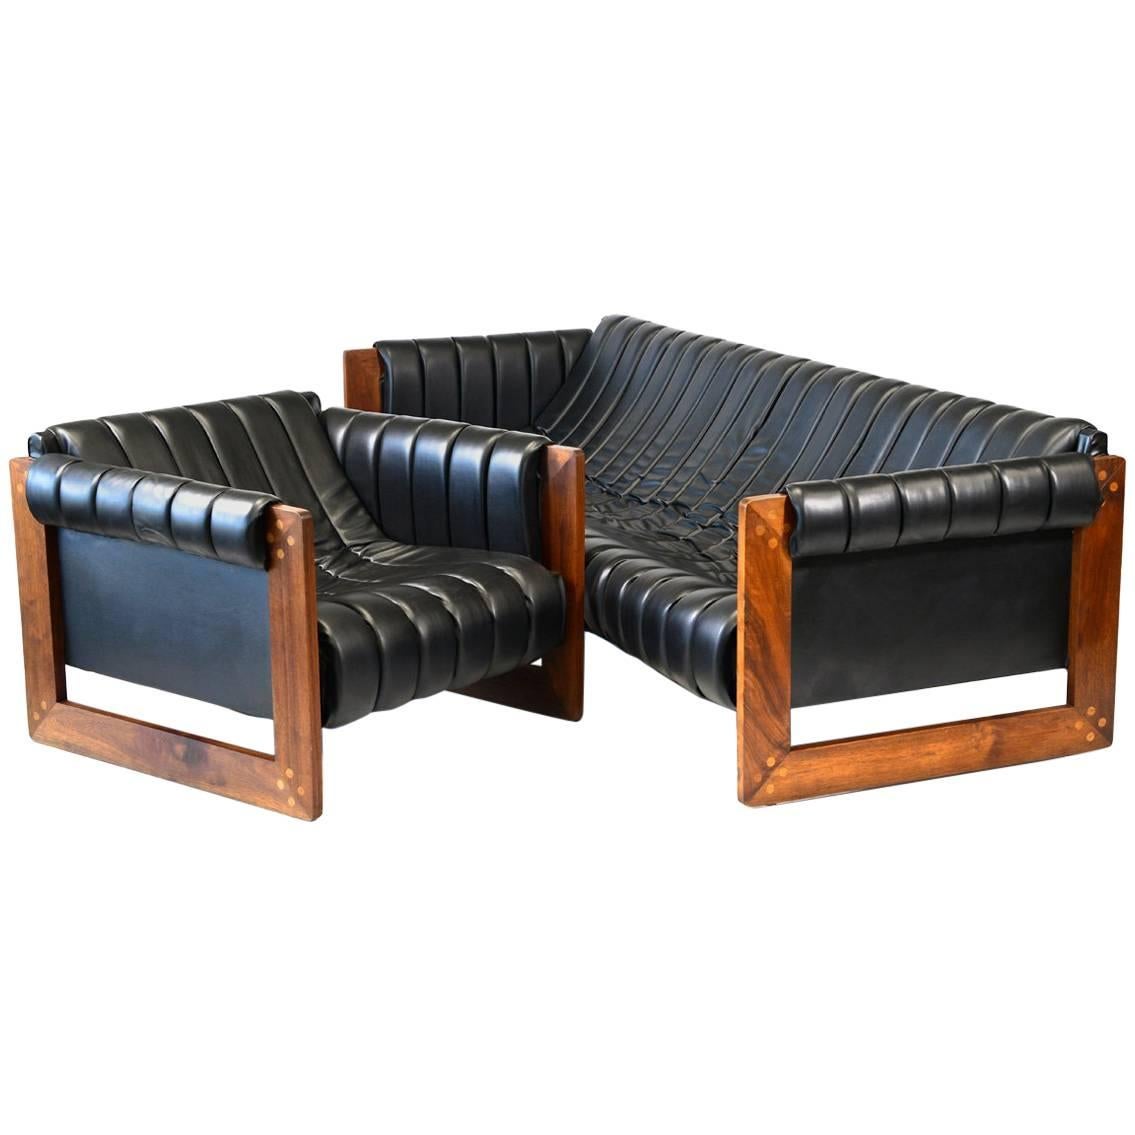 Channel Tufted Sling Sofa and Lounge Chair